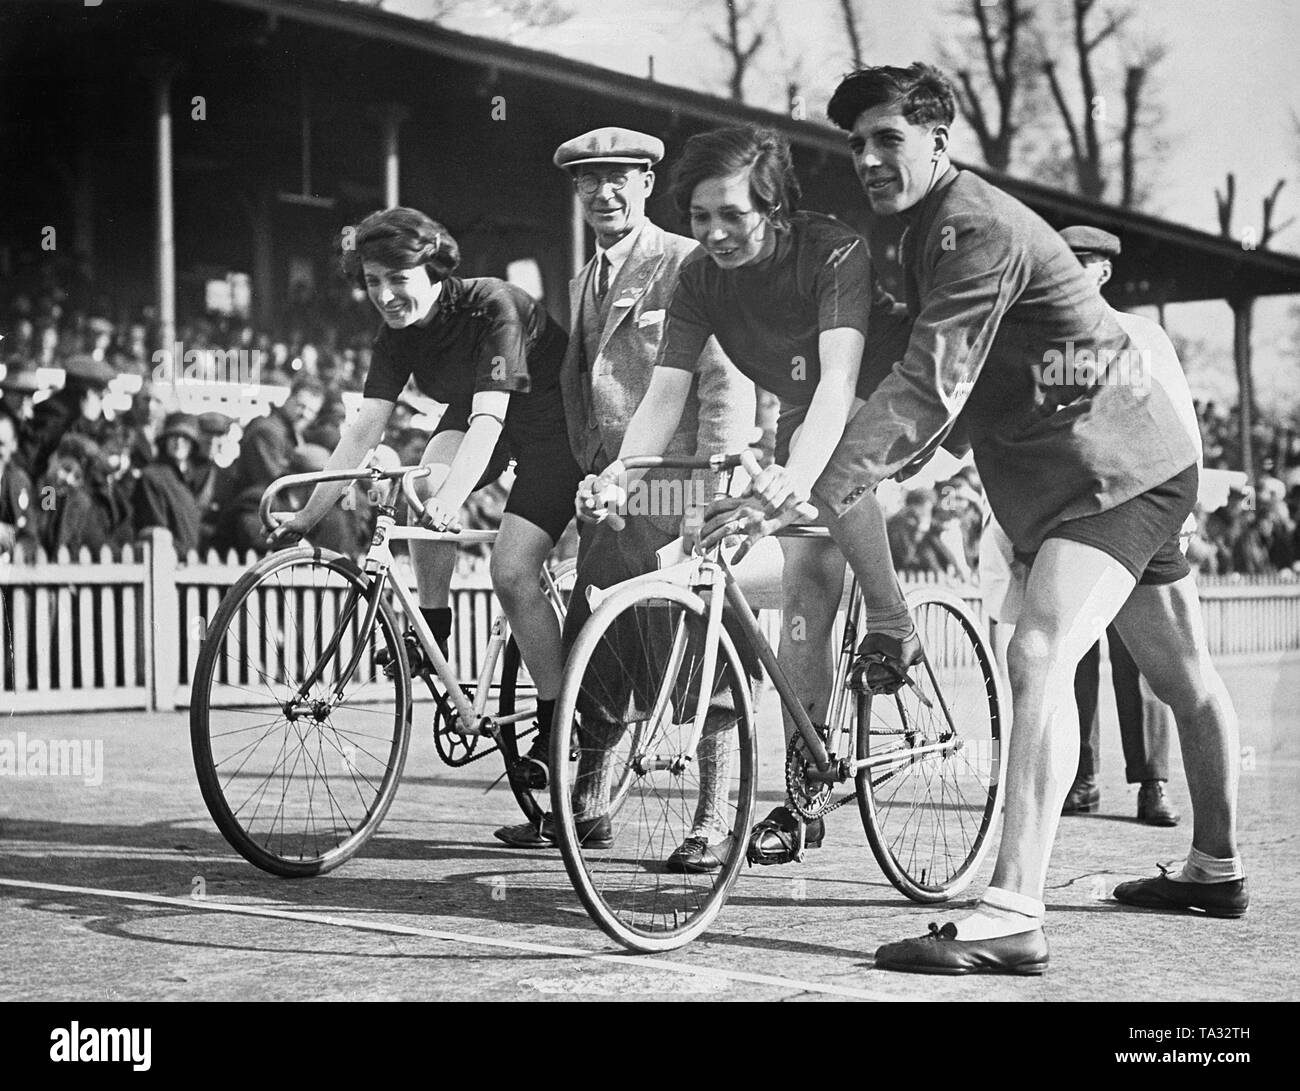 Two young track cyclists wait for the start of a race on April 1, 1929. They and their bikes are supported by helpers. In the background, spectator stands. Stock Photo